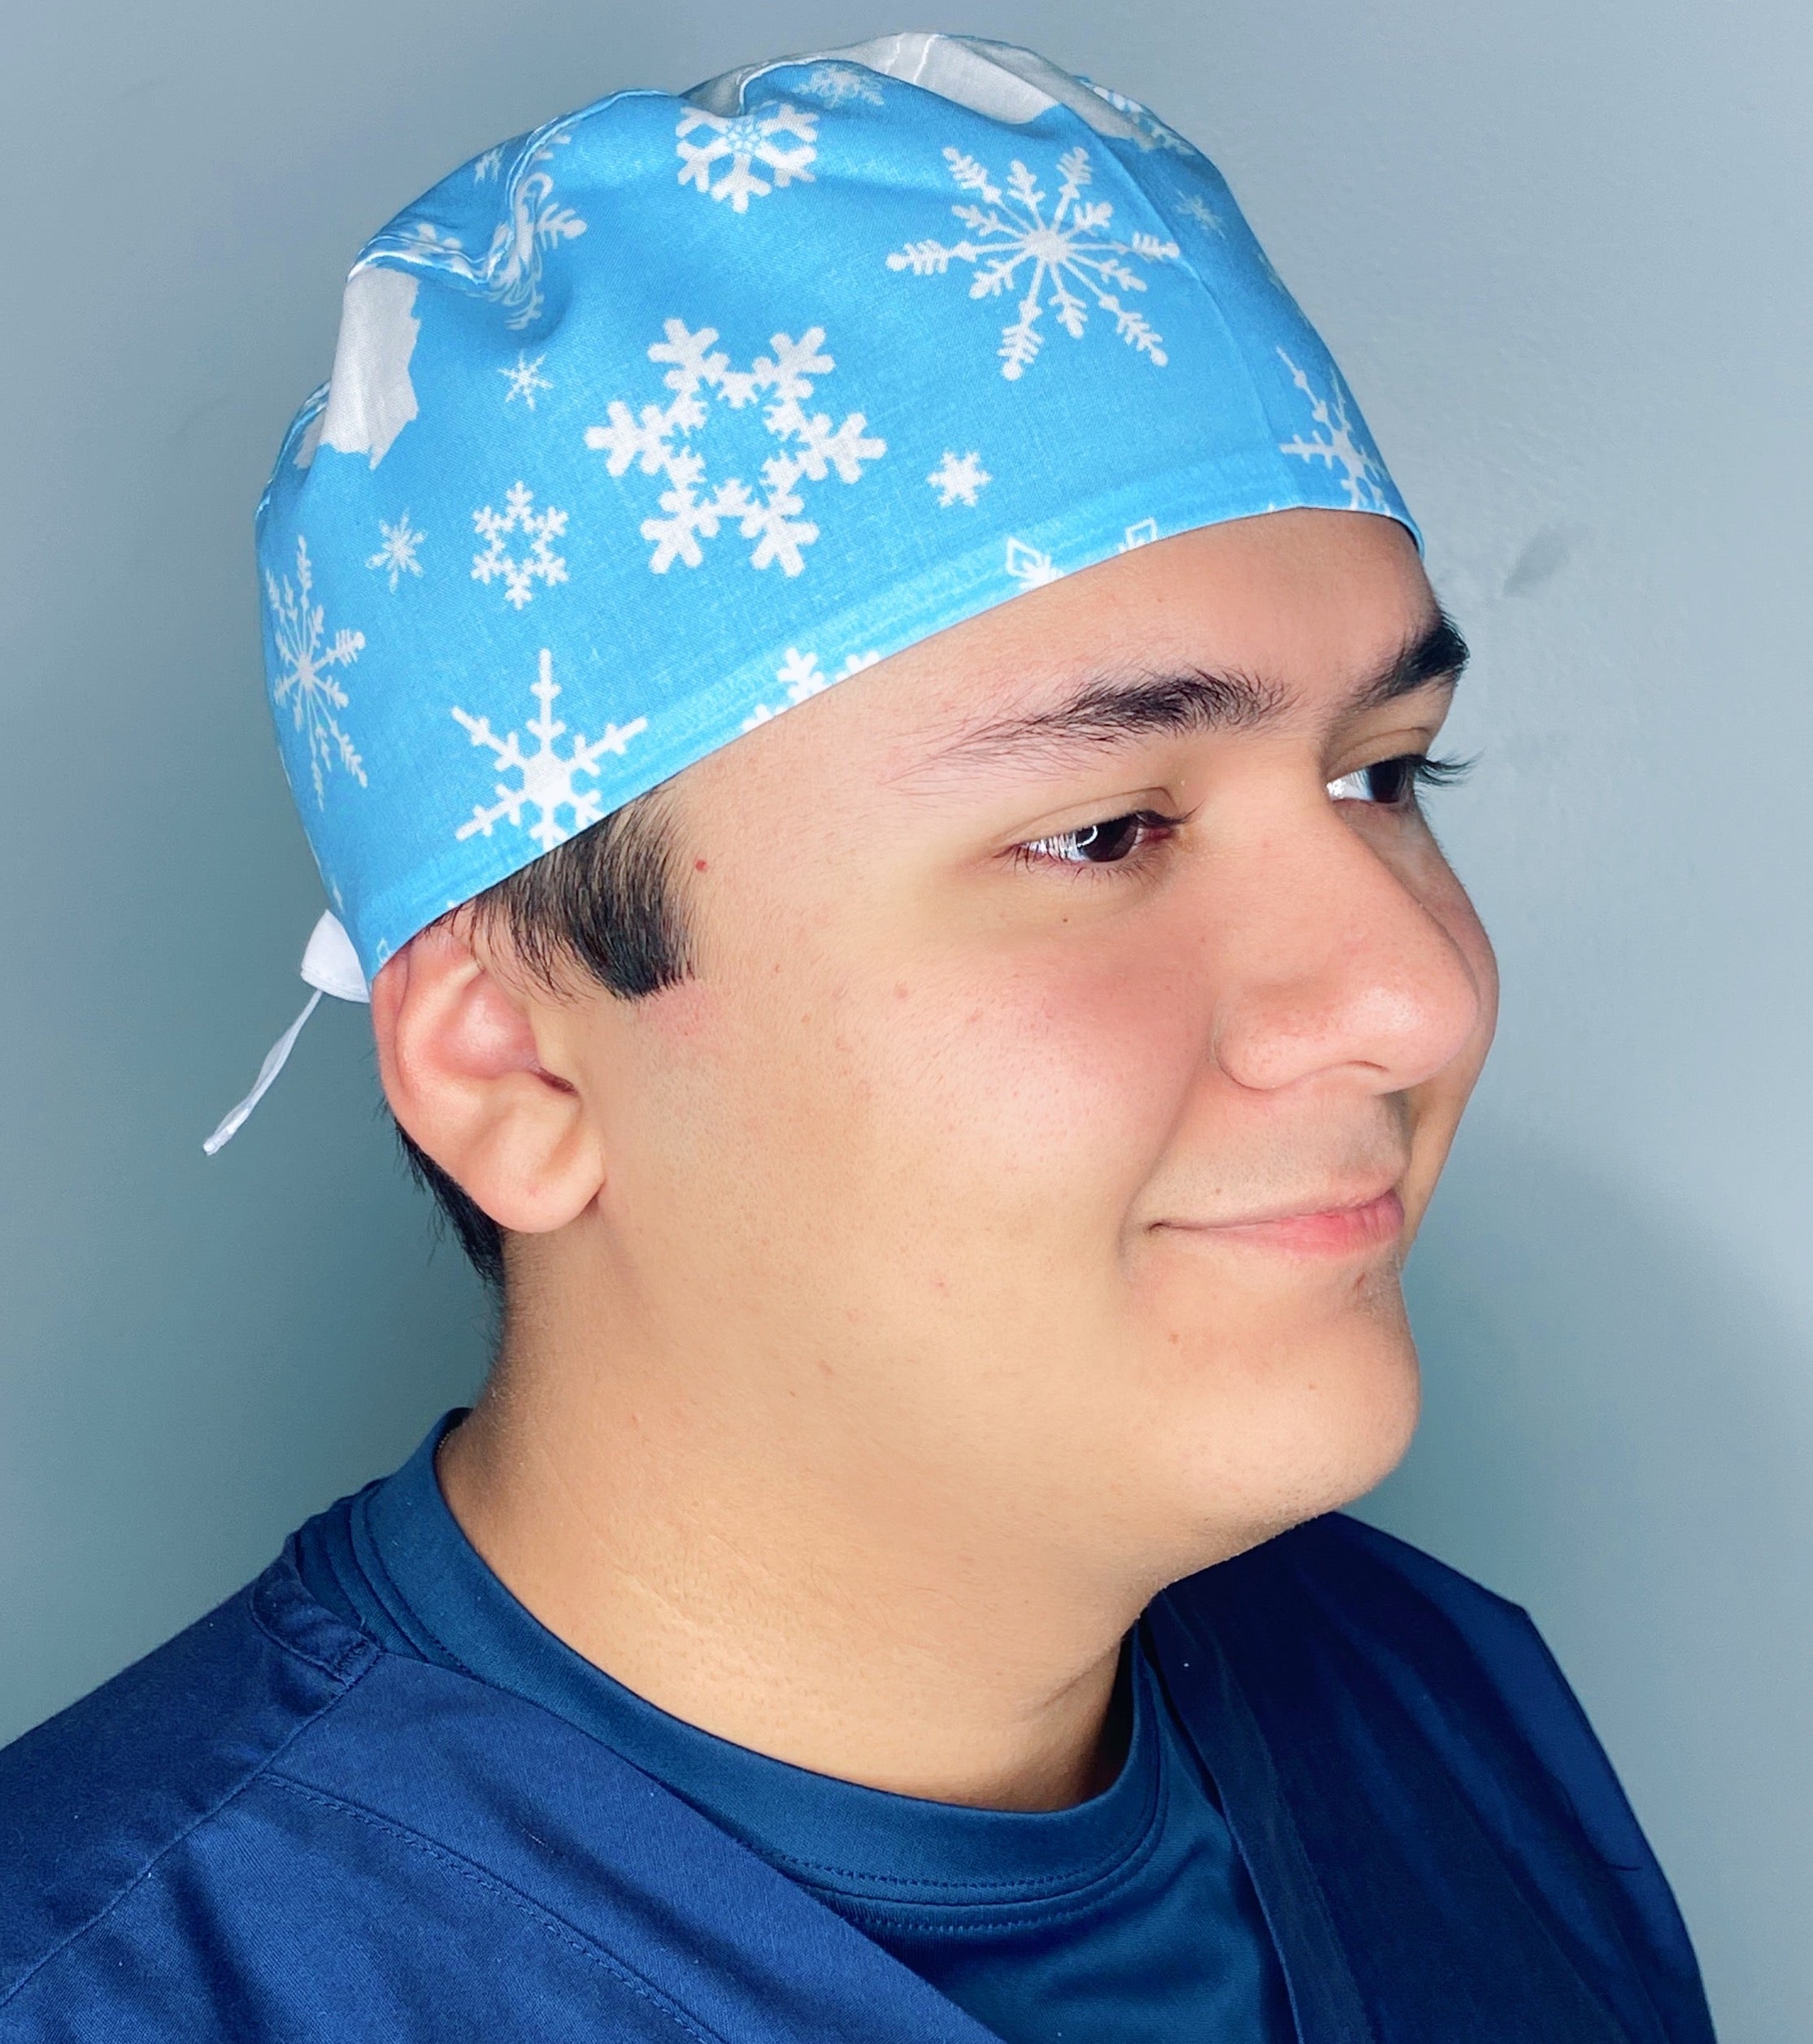 The State of Michigan & Snowflakes Christmas/Winter themed Unisex Holiday Scrub Cap